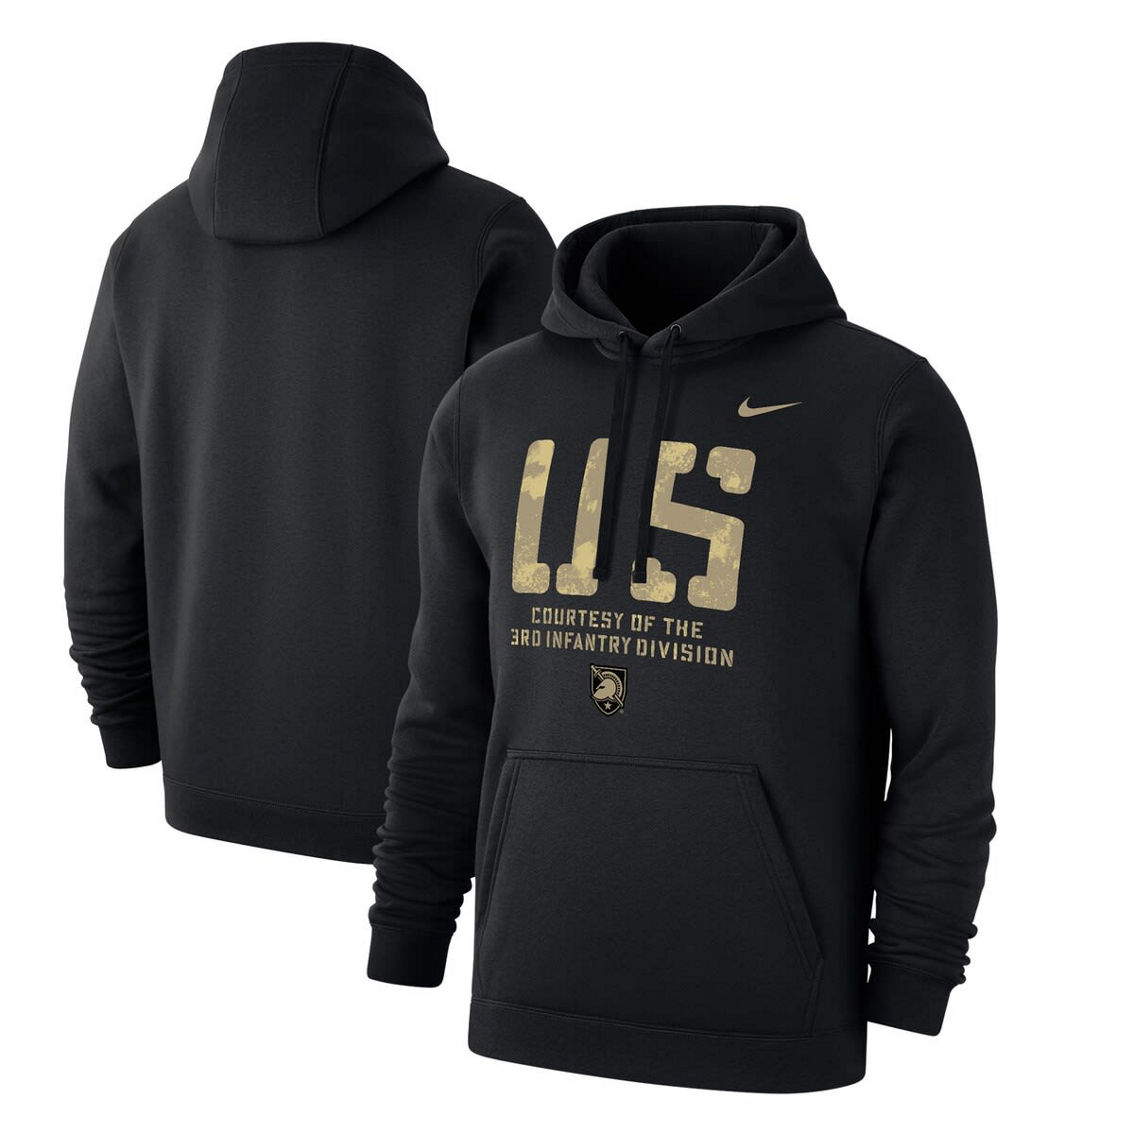 Men's Nike Black Army Black Knights Rivalry Courtesy Of Fleece Pullover Hoodie - Image 2 of 4